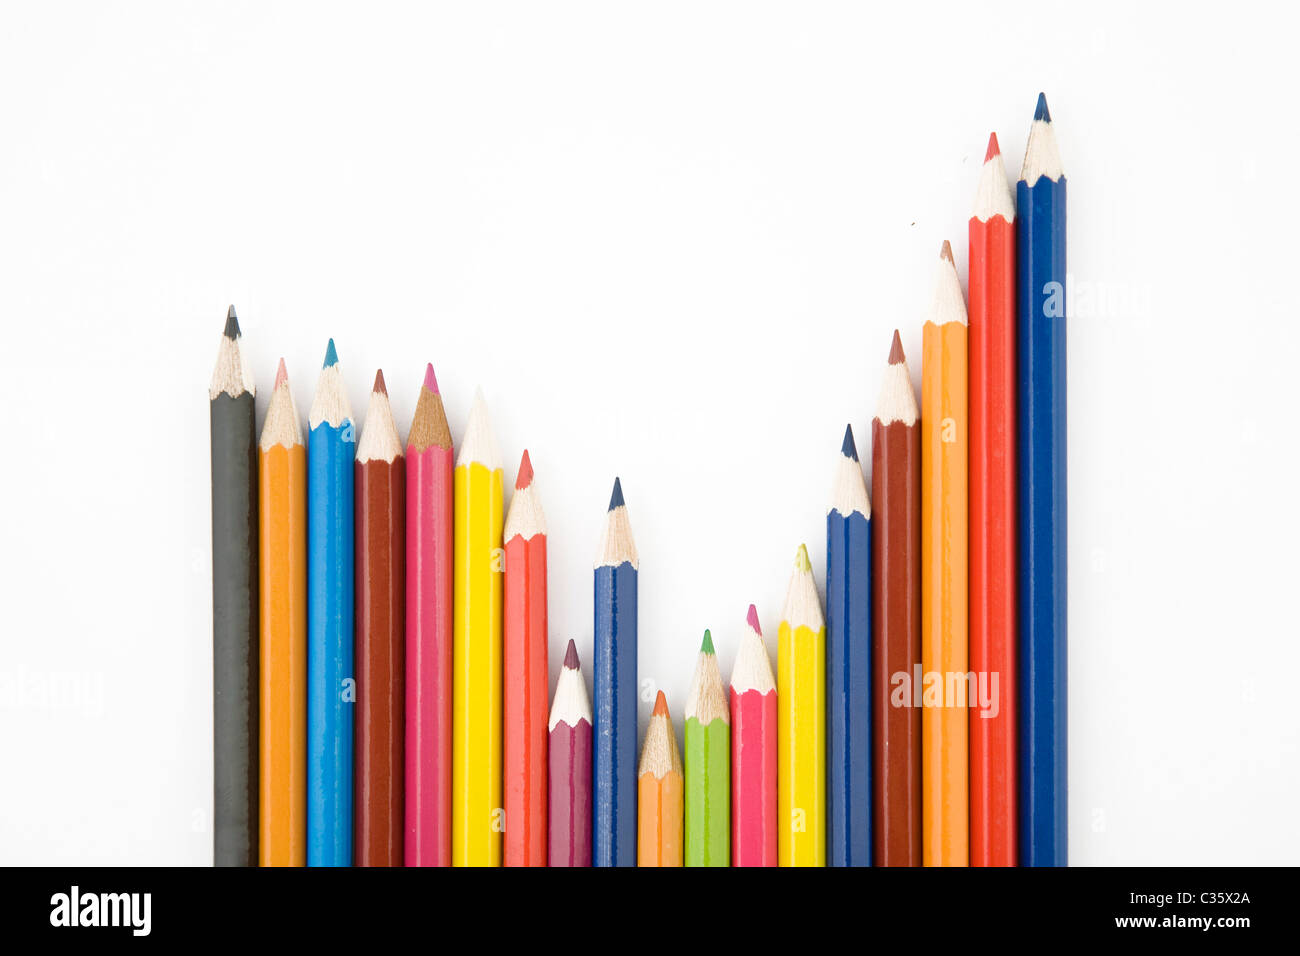 front view of color pencils over white background, arranged in graphic shape Stock Photo